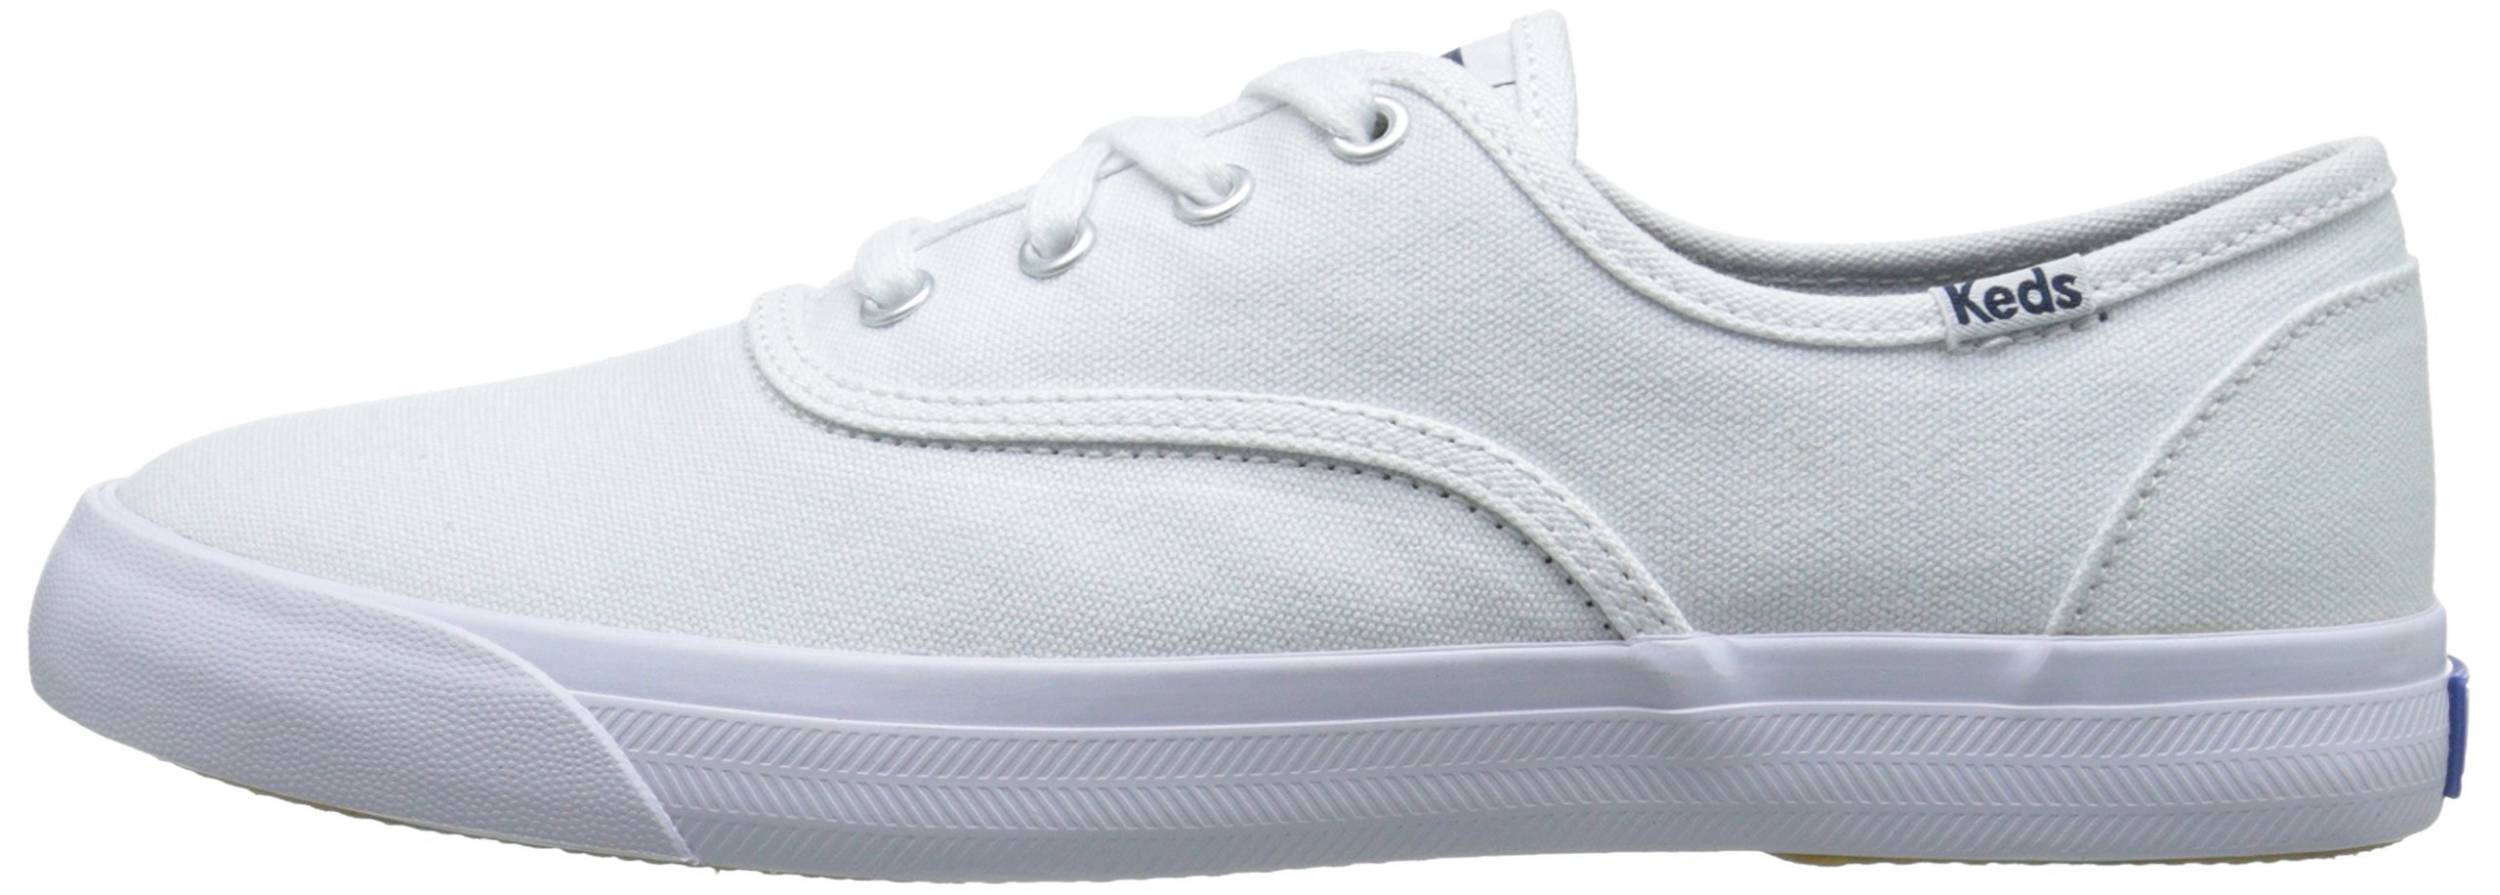 Only $45 + Review of Keds Triumph 